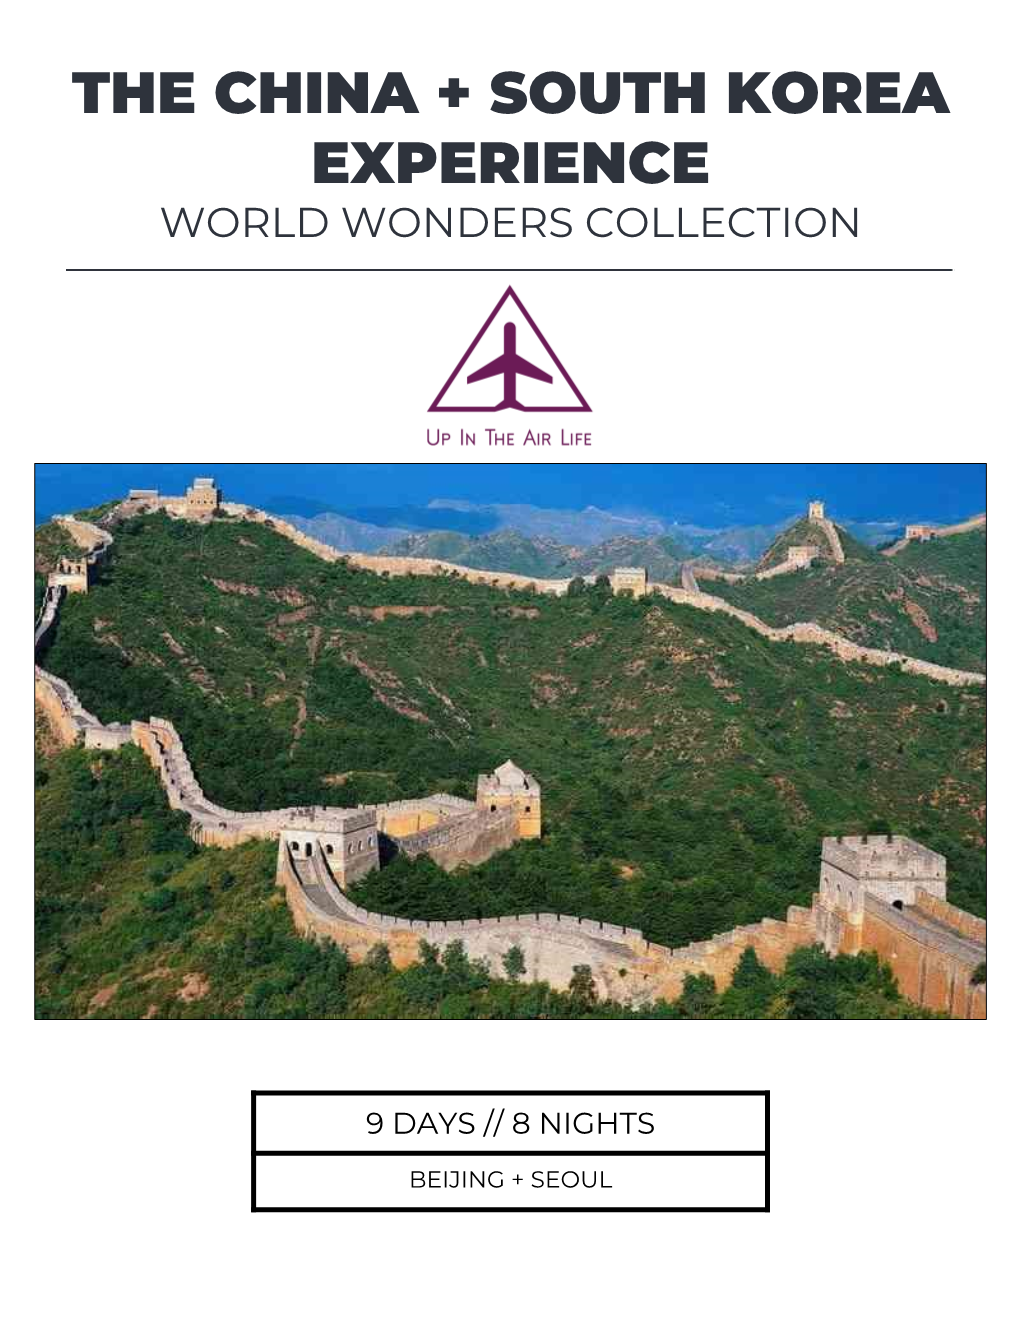 The China + South Korea Experience World Wonders Collection